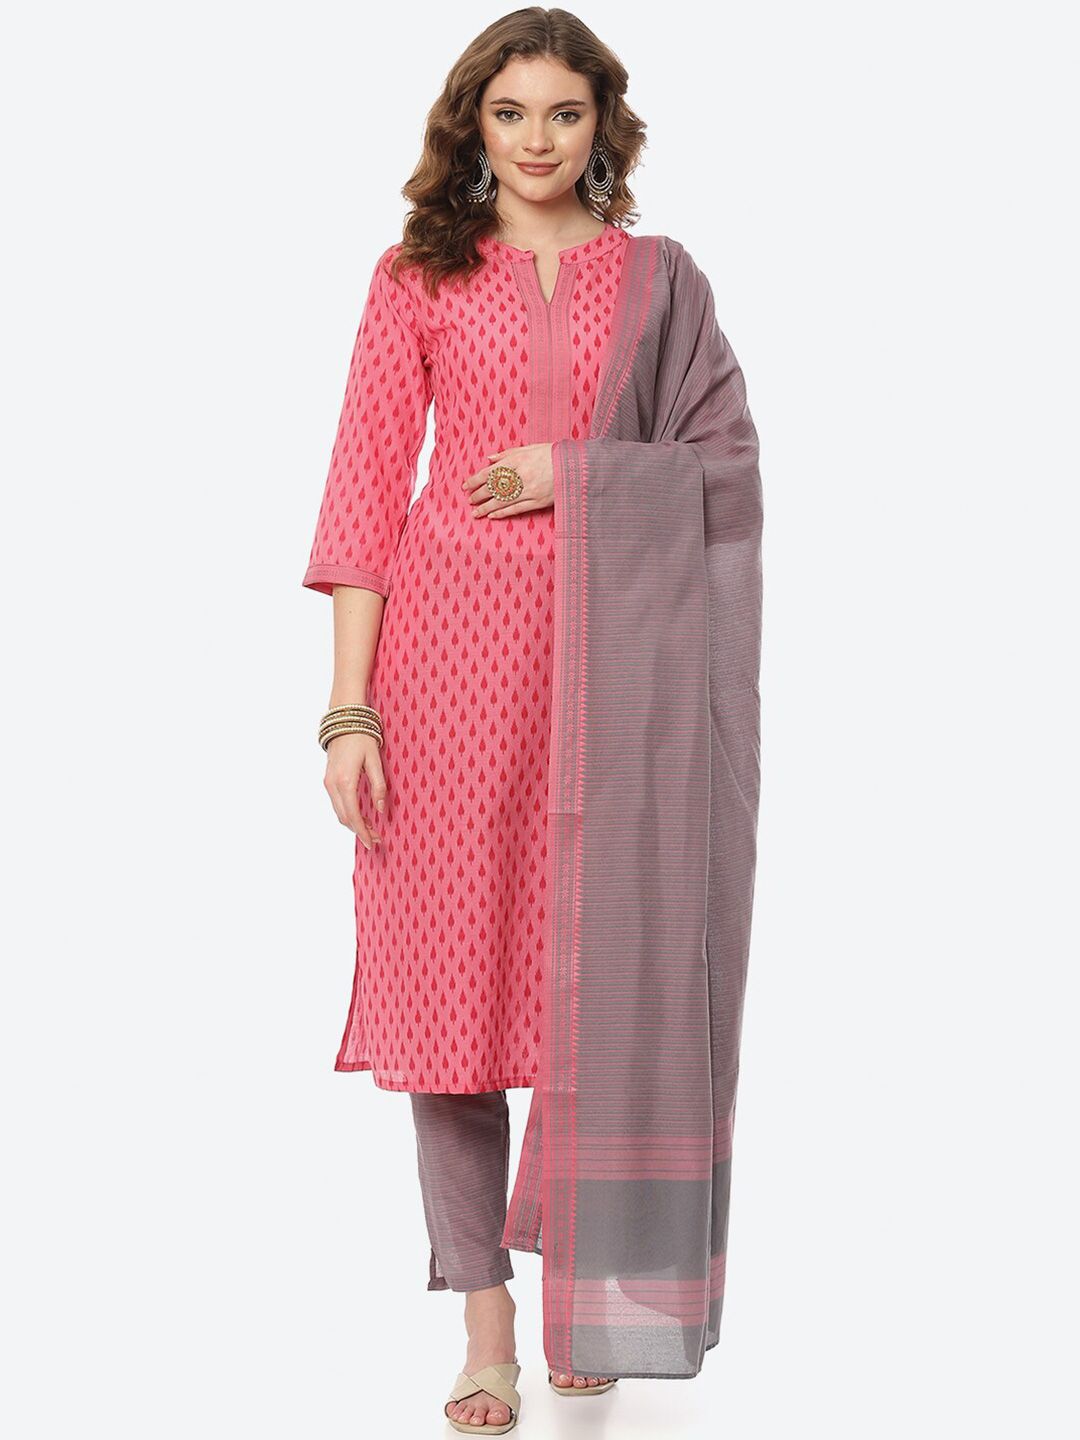 Biba Womens Pink & Grey Printed Unstitched Dress Material Price in India